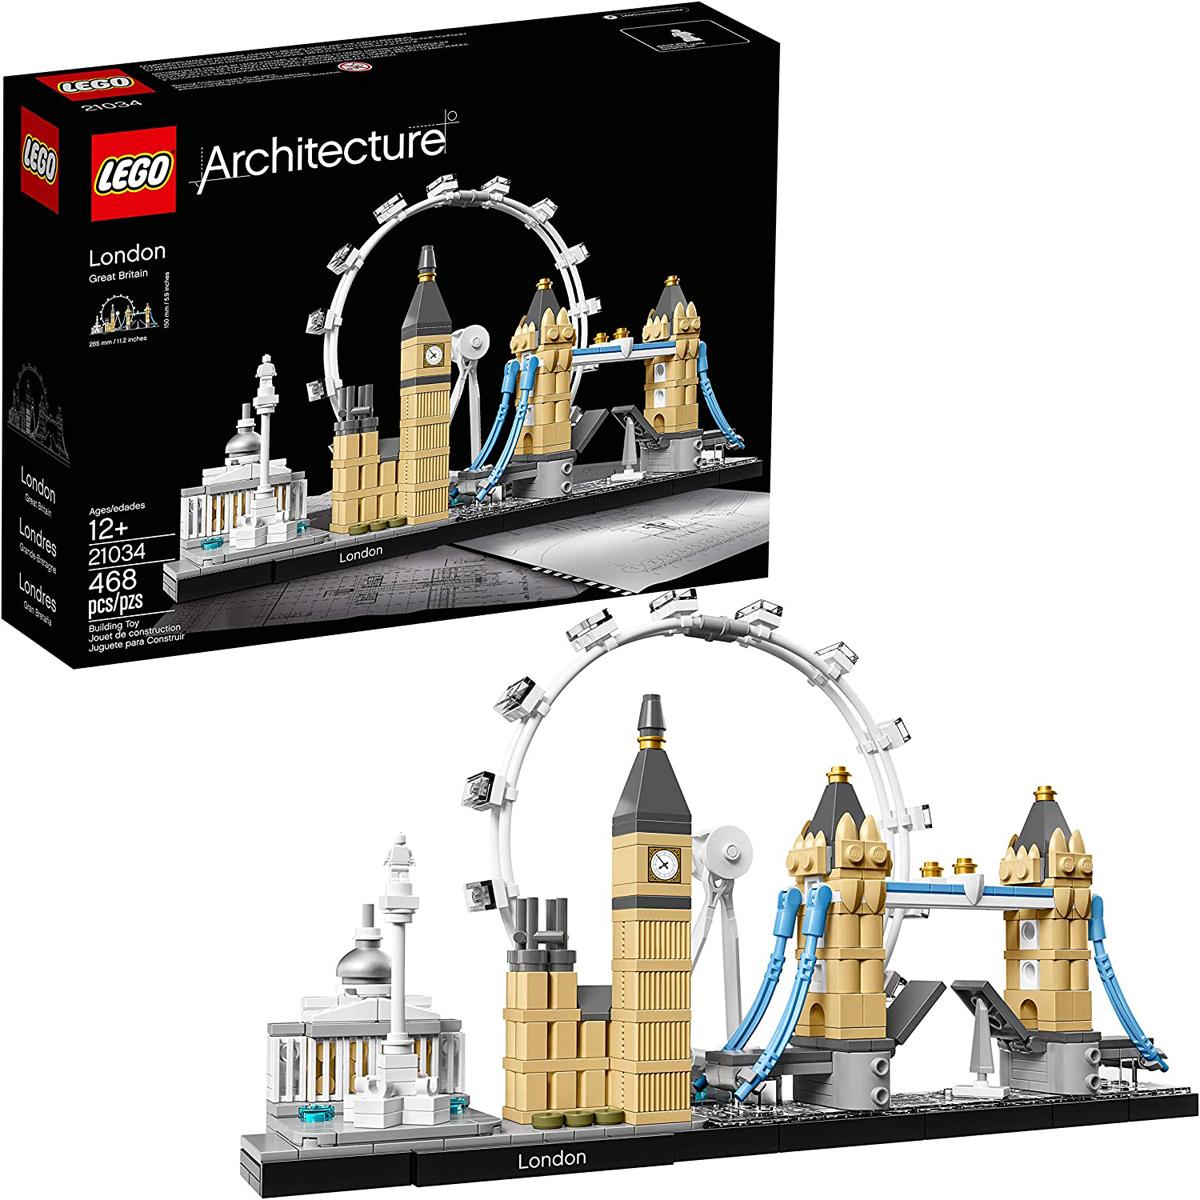 Lego Architecture London Skyline Building Set for $31.99 Shipped